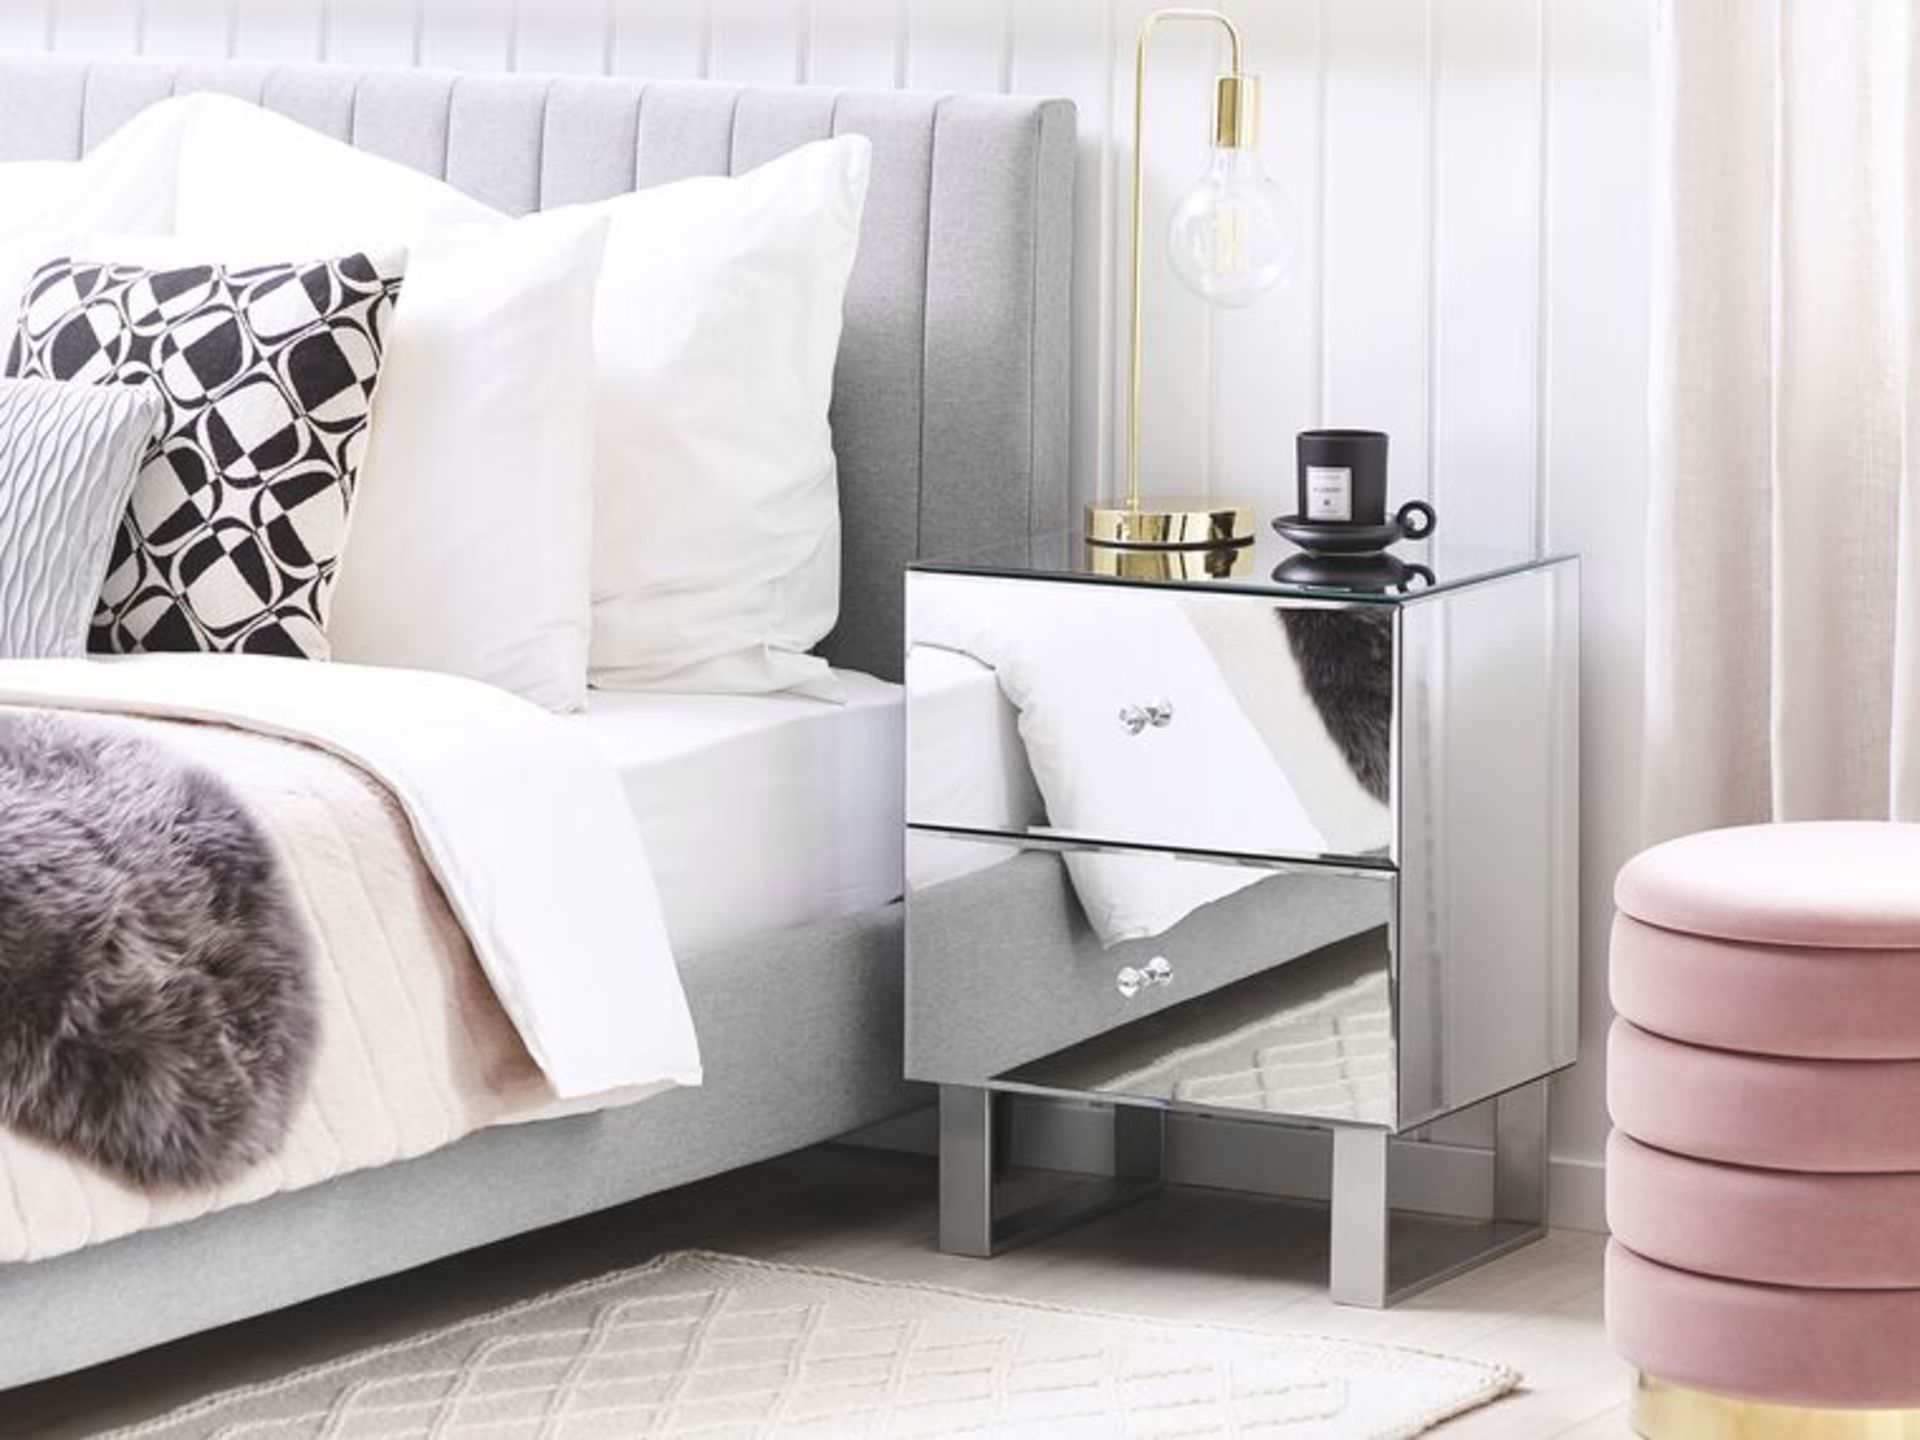 Nesle 2 Drawer Mirrored Bedside Table. - R13a.9. RRP £399.99. Introduce a glam vibe to your - Image 2 of 2